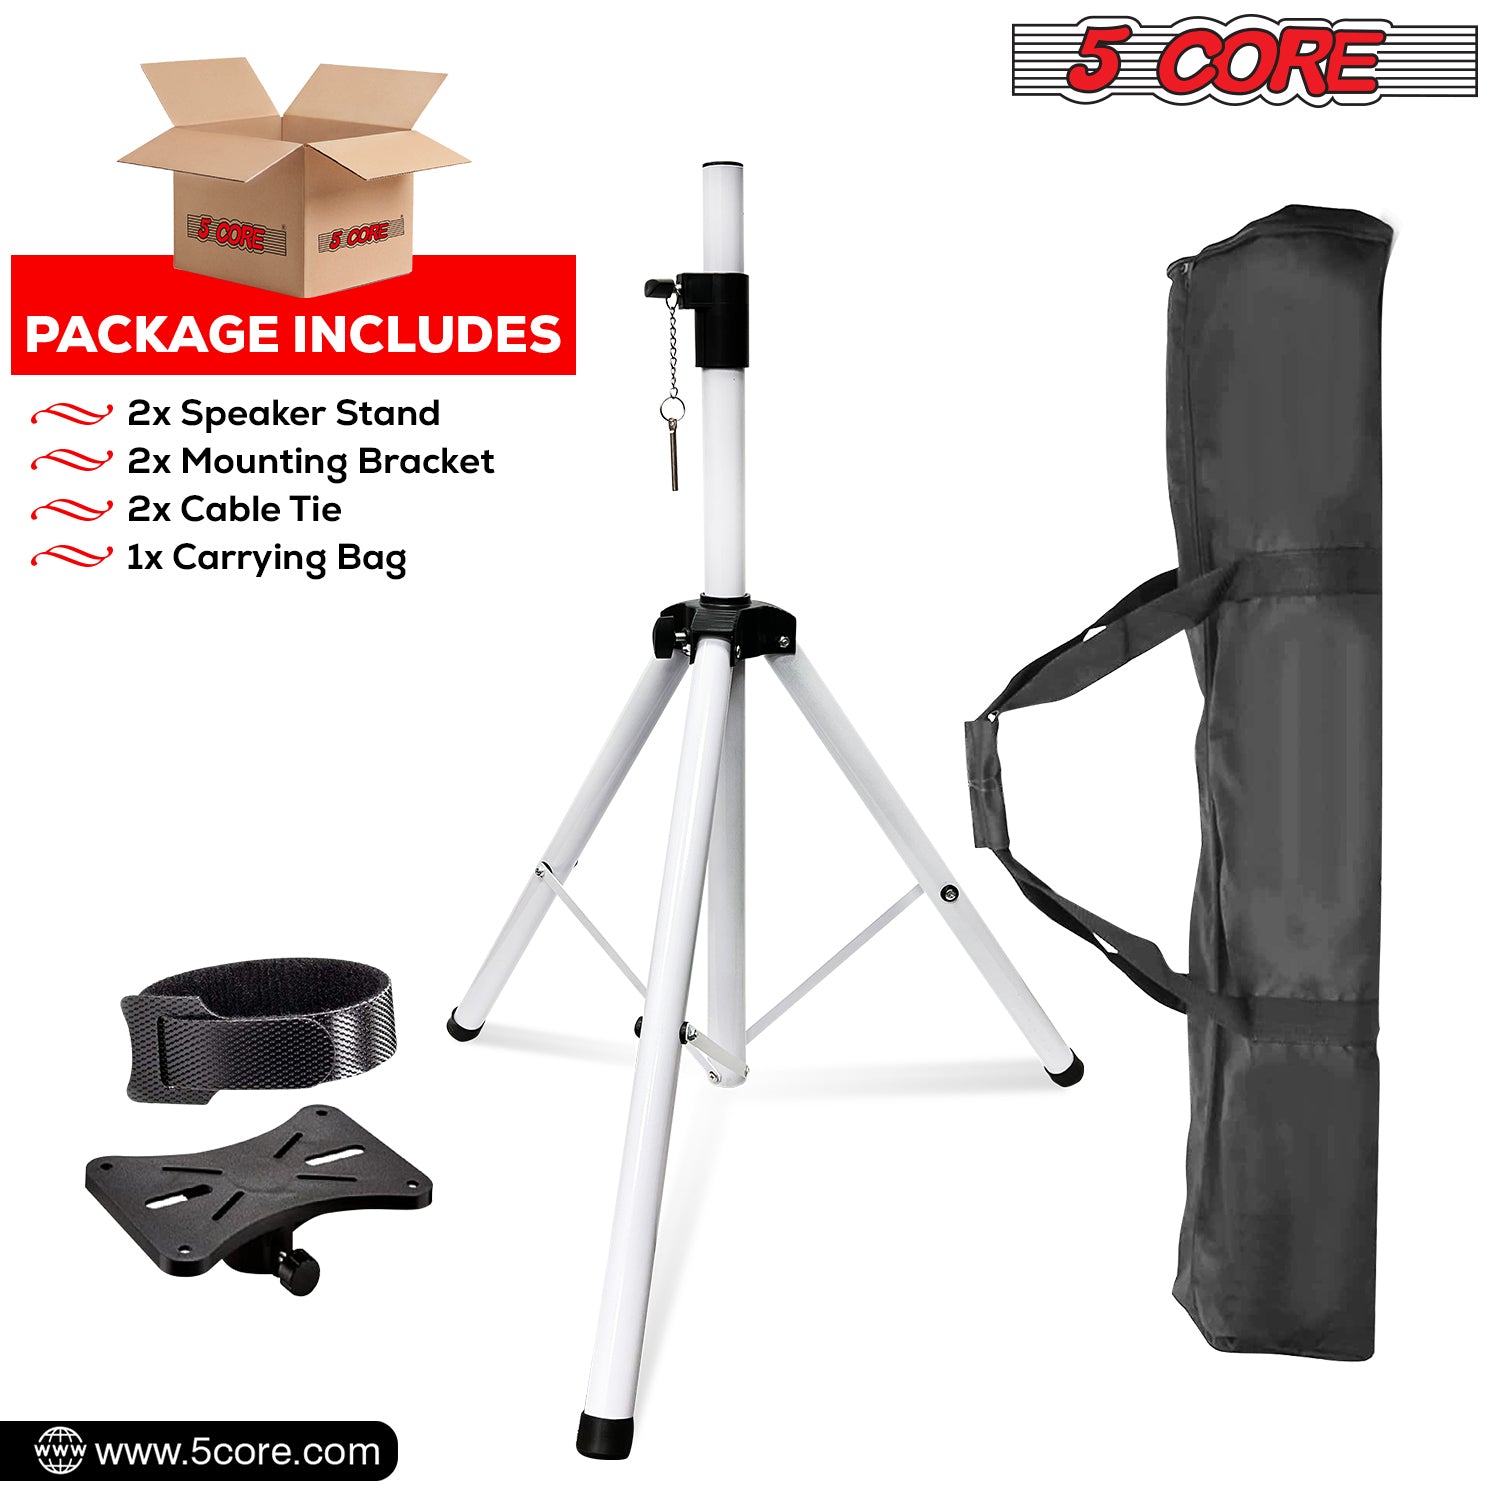 5Core Speaker Stands Tripod Tall DJ Studio Monitor stands 72" Pole Mount White with Bag